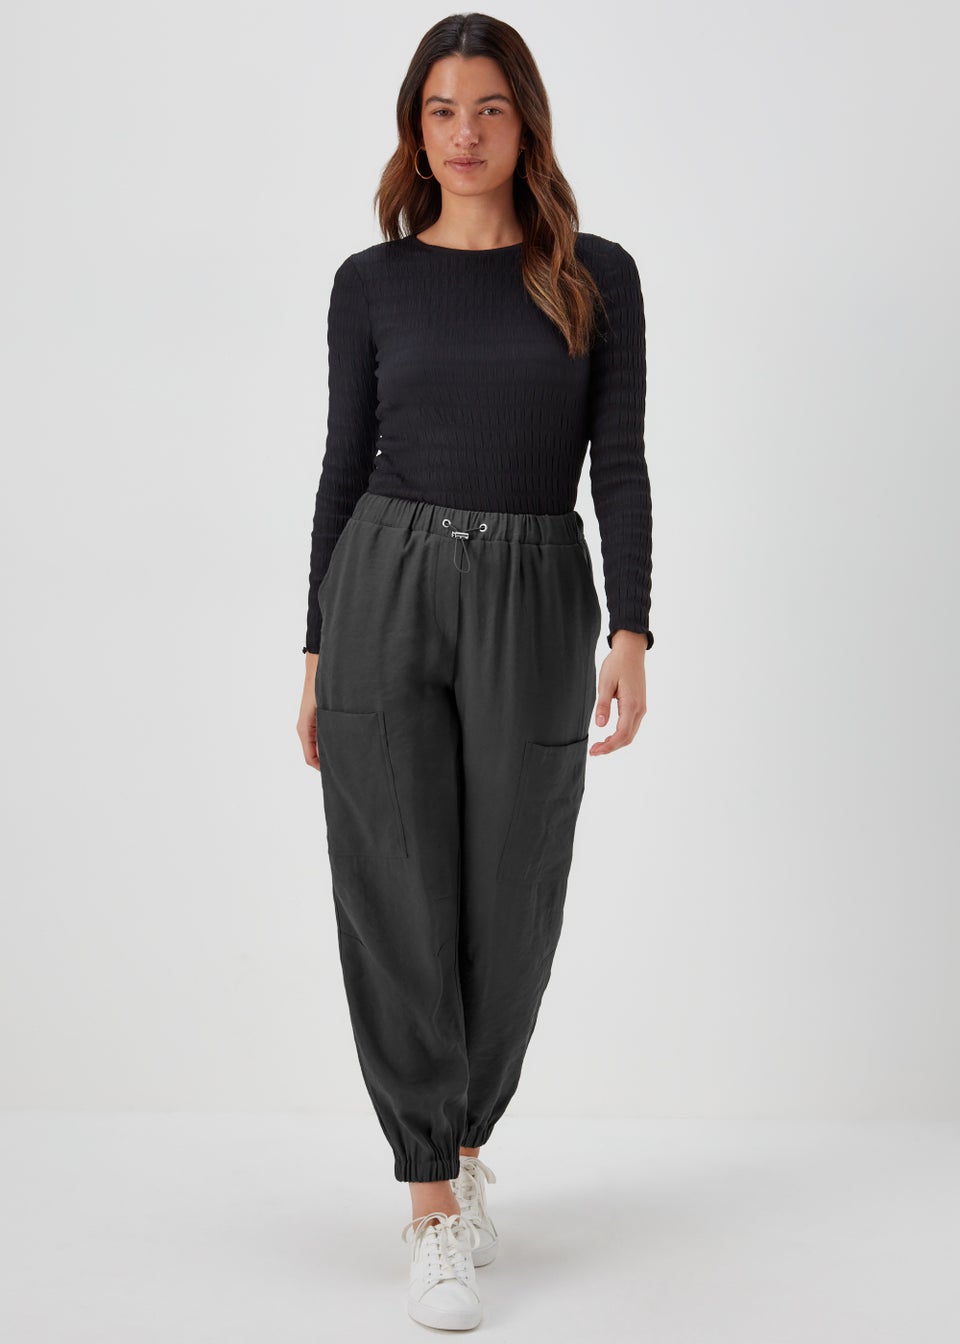 Charcoal Parachute Trousers